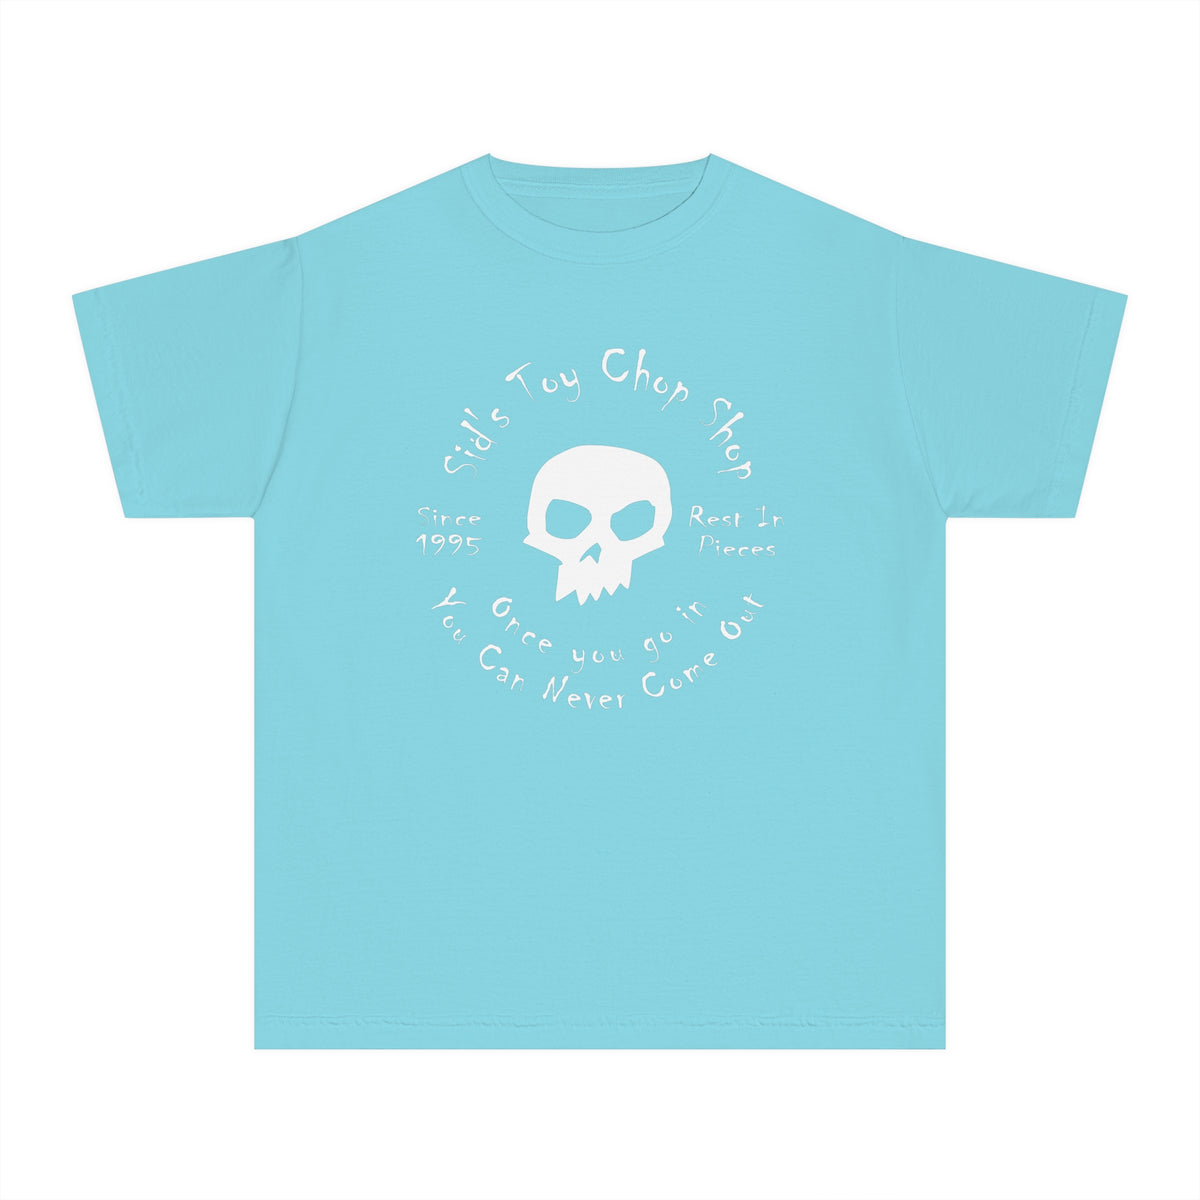 Sid's Toy Chop Shop Comfort Colors Youth Midweight Tee